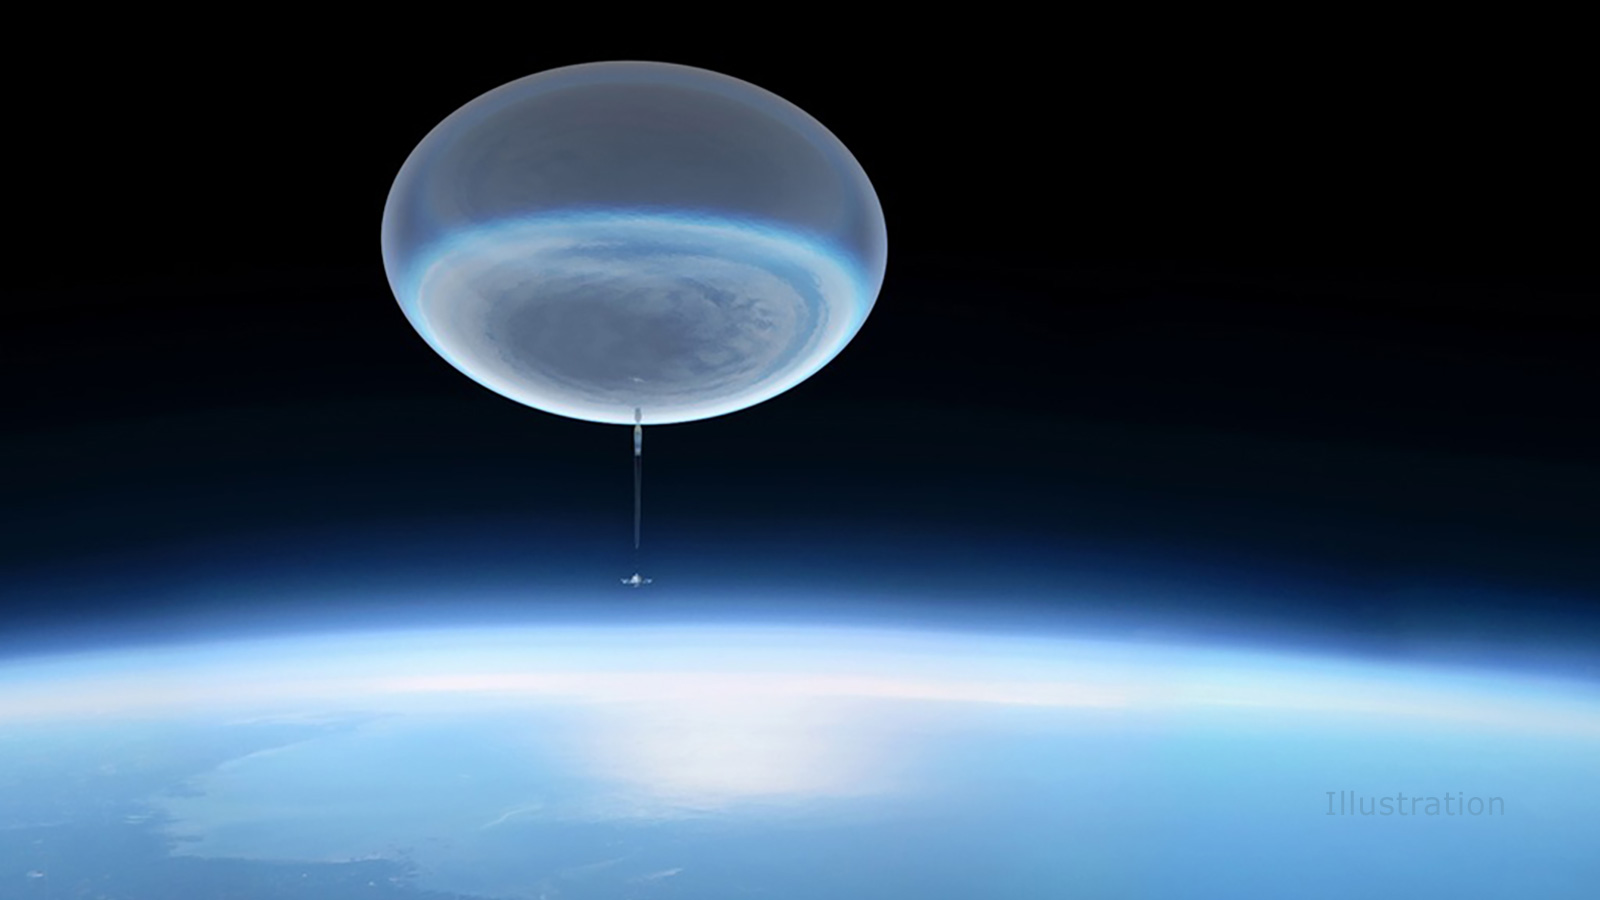 Illustration of a balloon floating in the stratosphere above Earth